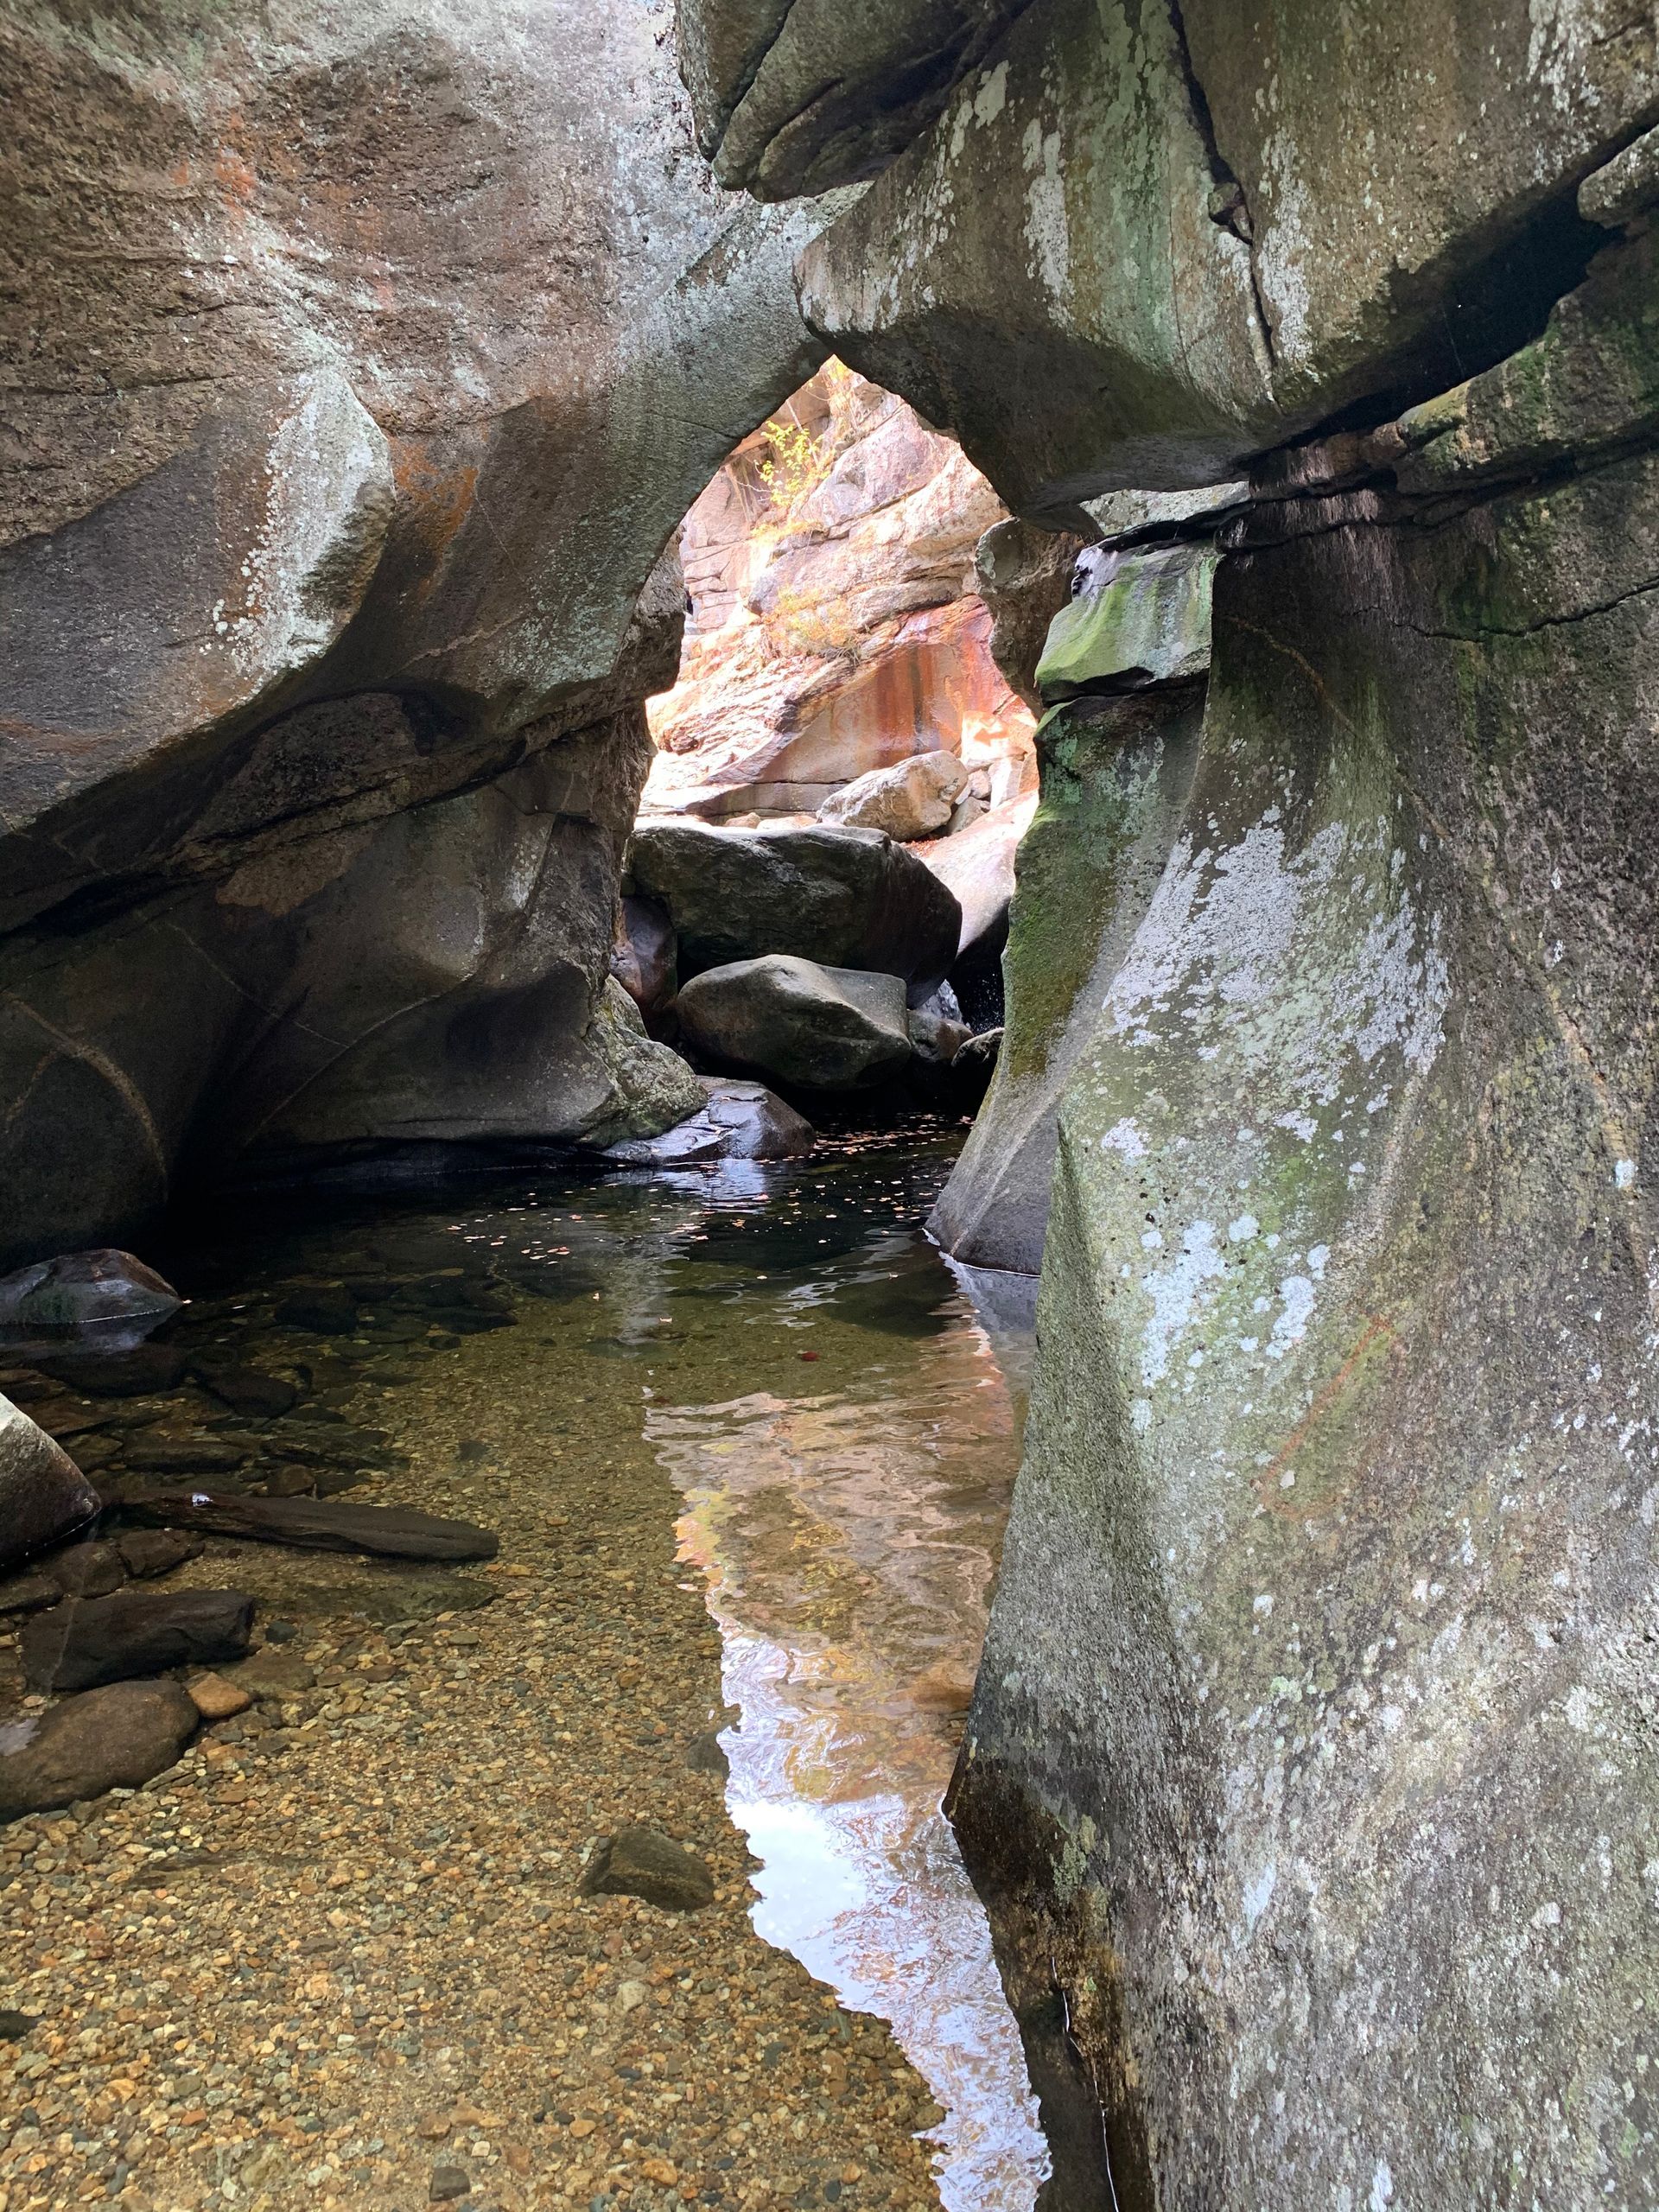 A small stream is coming out of a rocky cave.